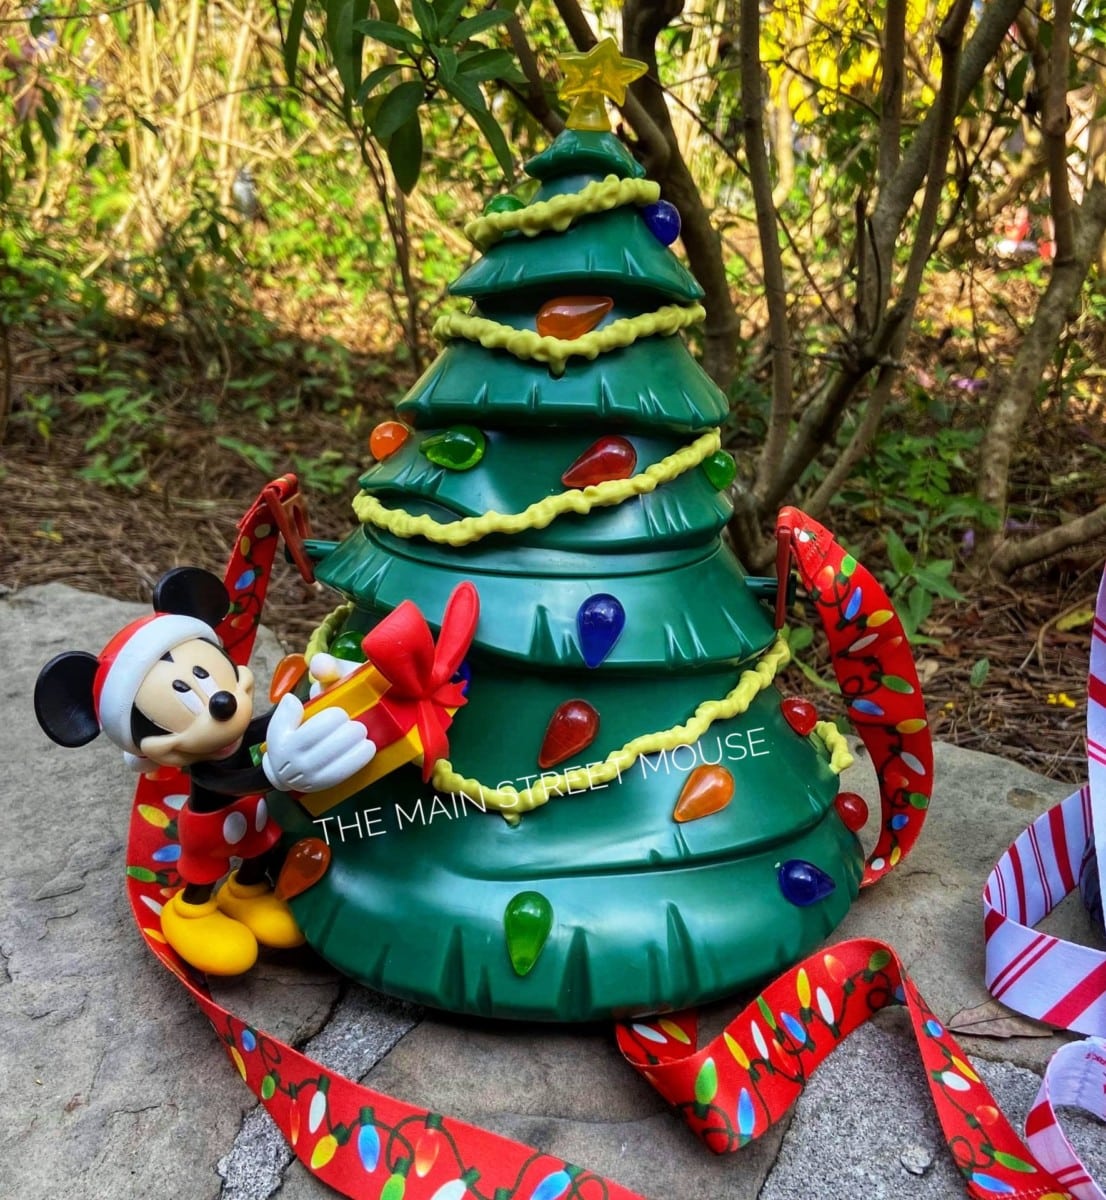 Two New Holiday Popcorn Buckets At Disney Parks!